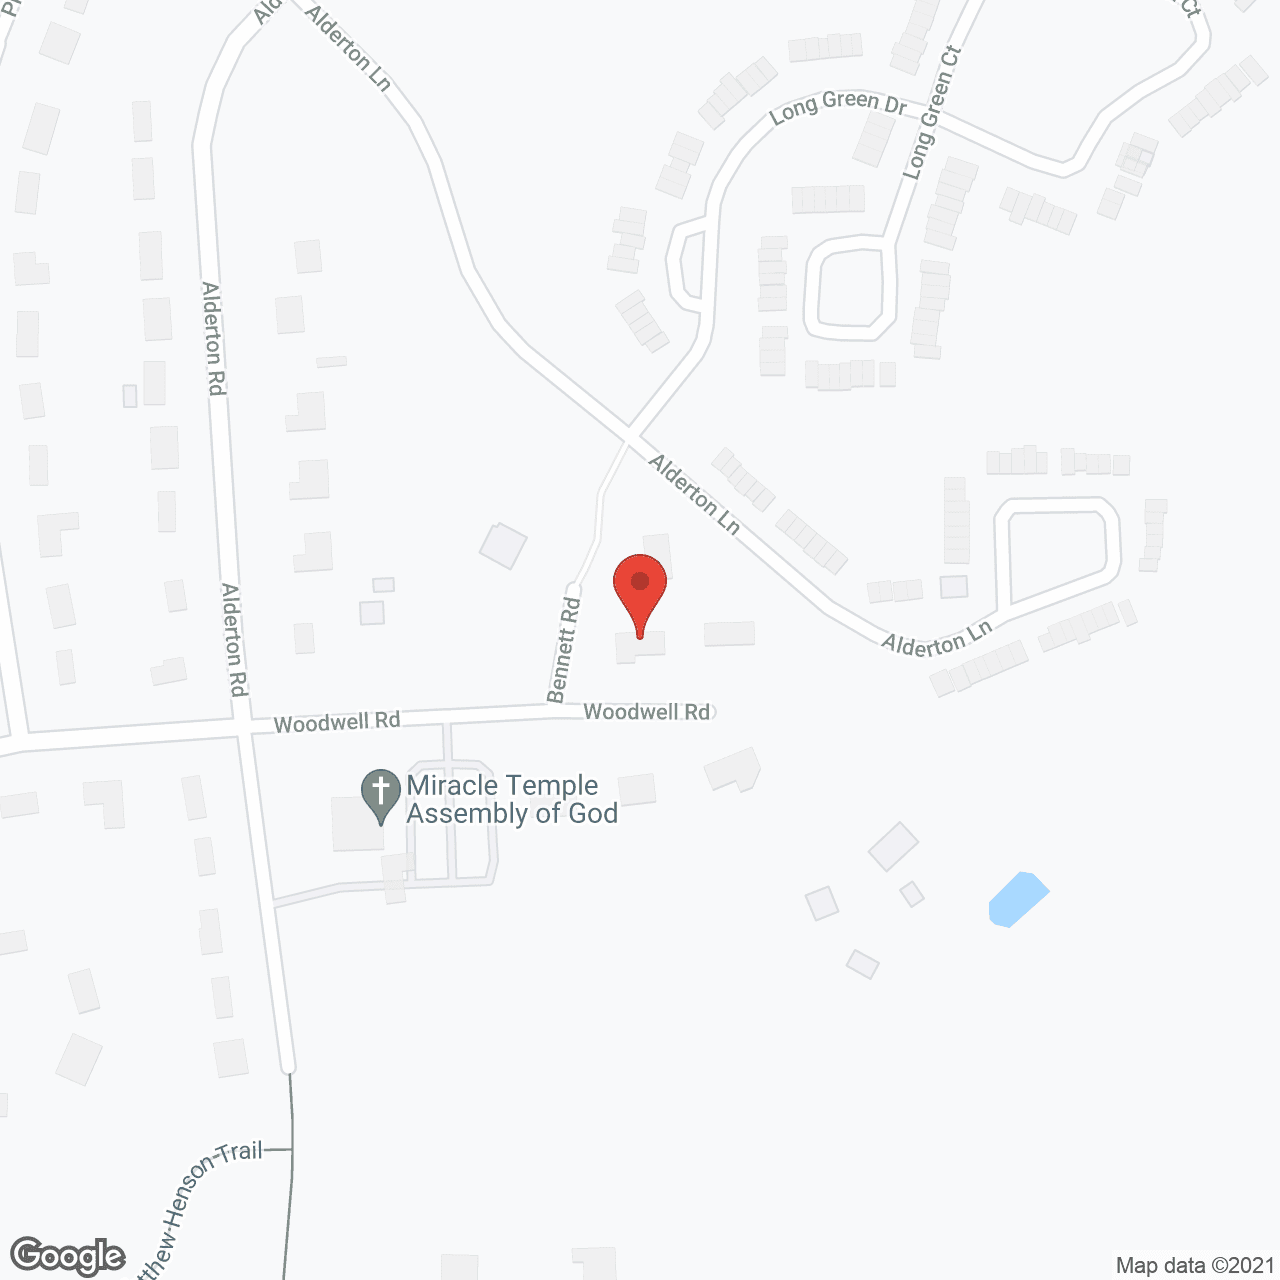 Assisted Care Consultants in google map